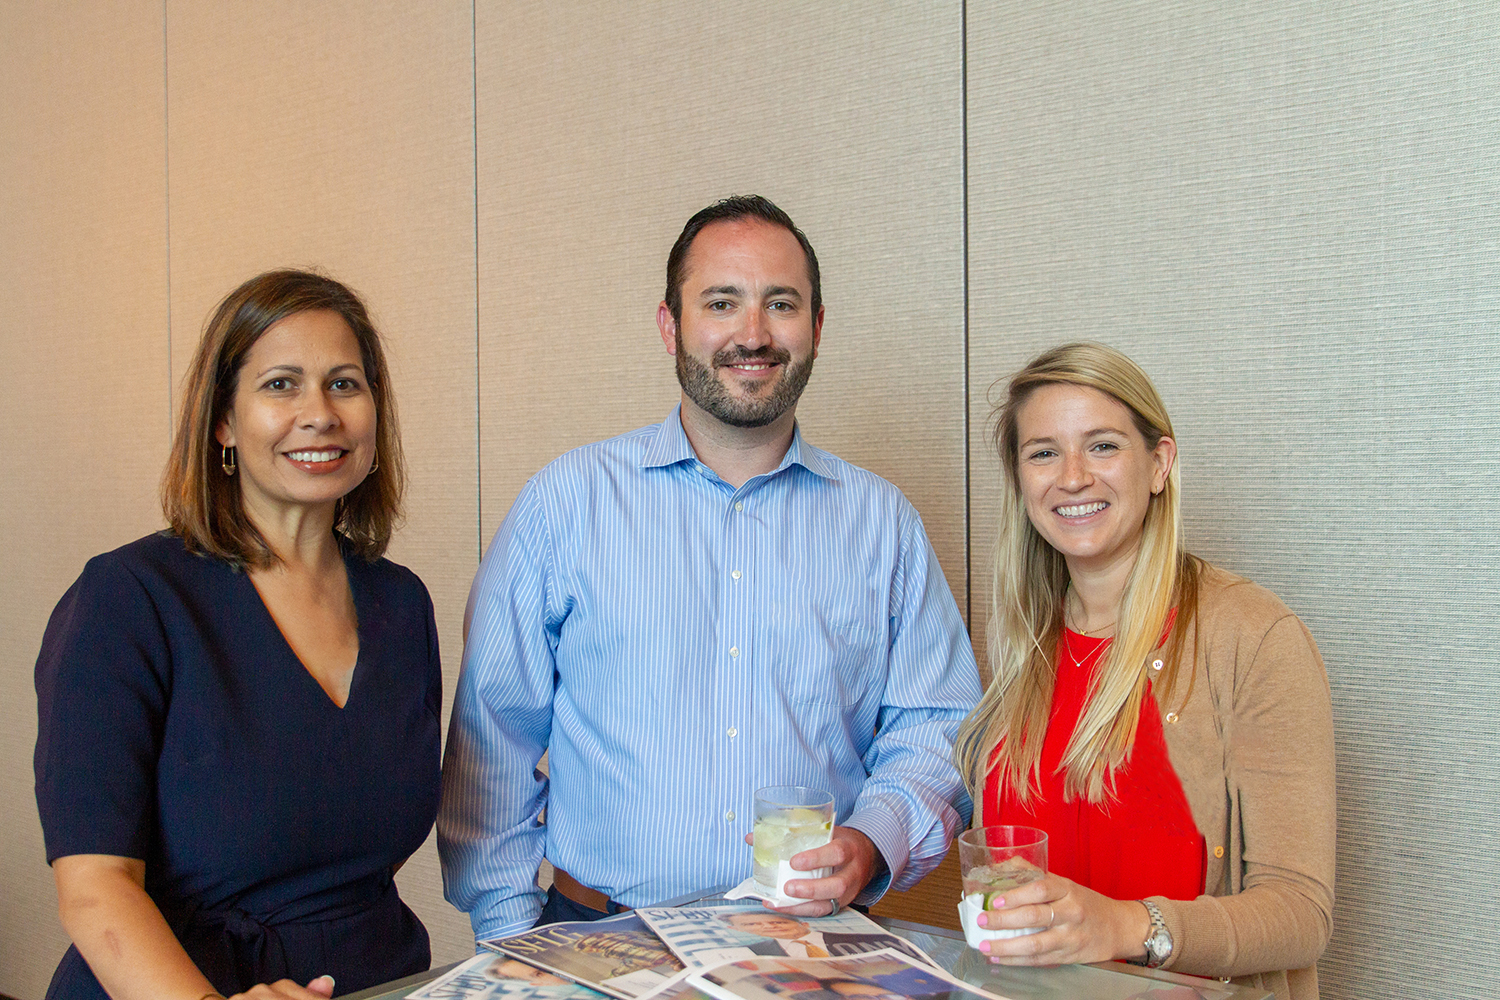 Members of the Levatas team: Office Manager Alicia Toledo, Account Group Leader Dan Zuba, and Senior Account Manager Melissa Mullery